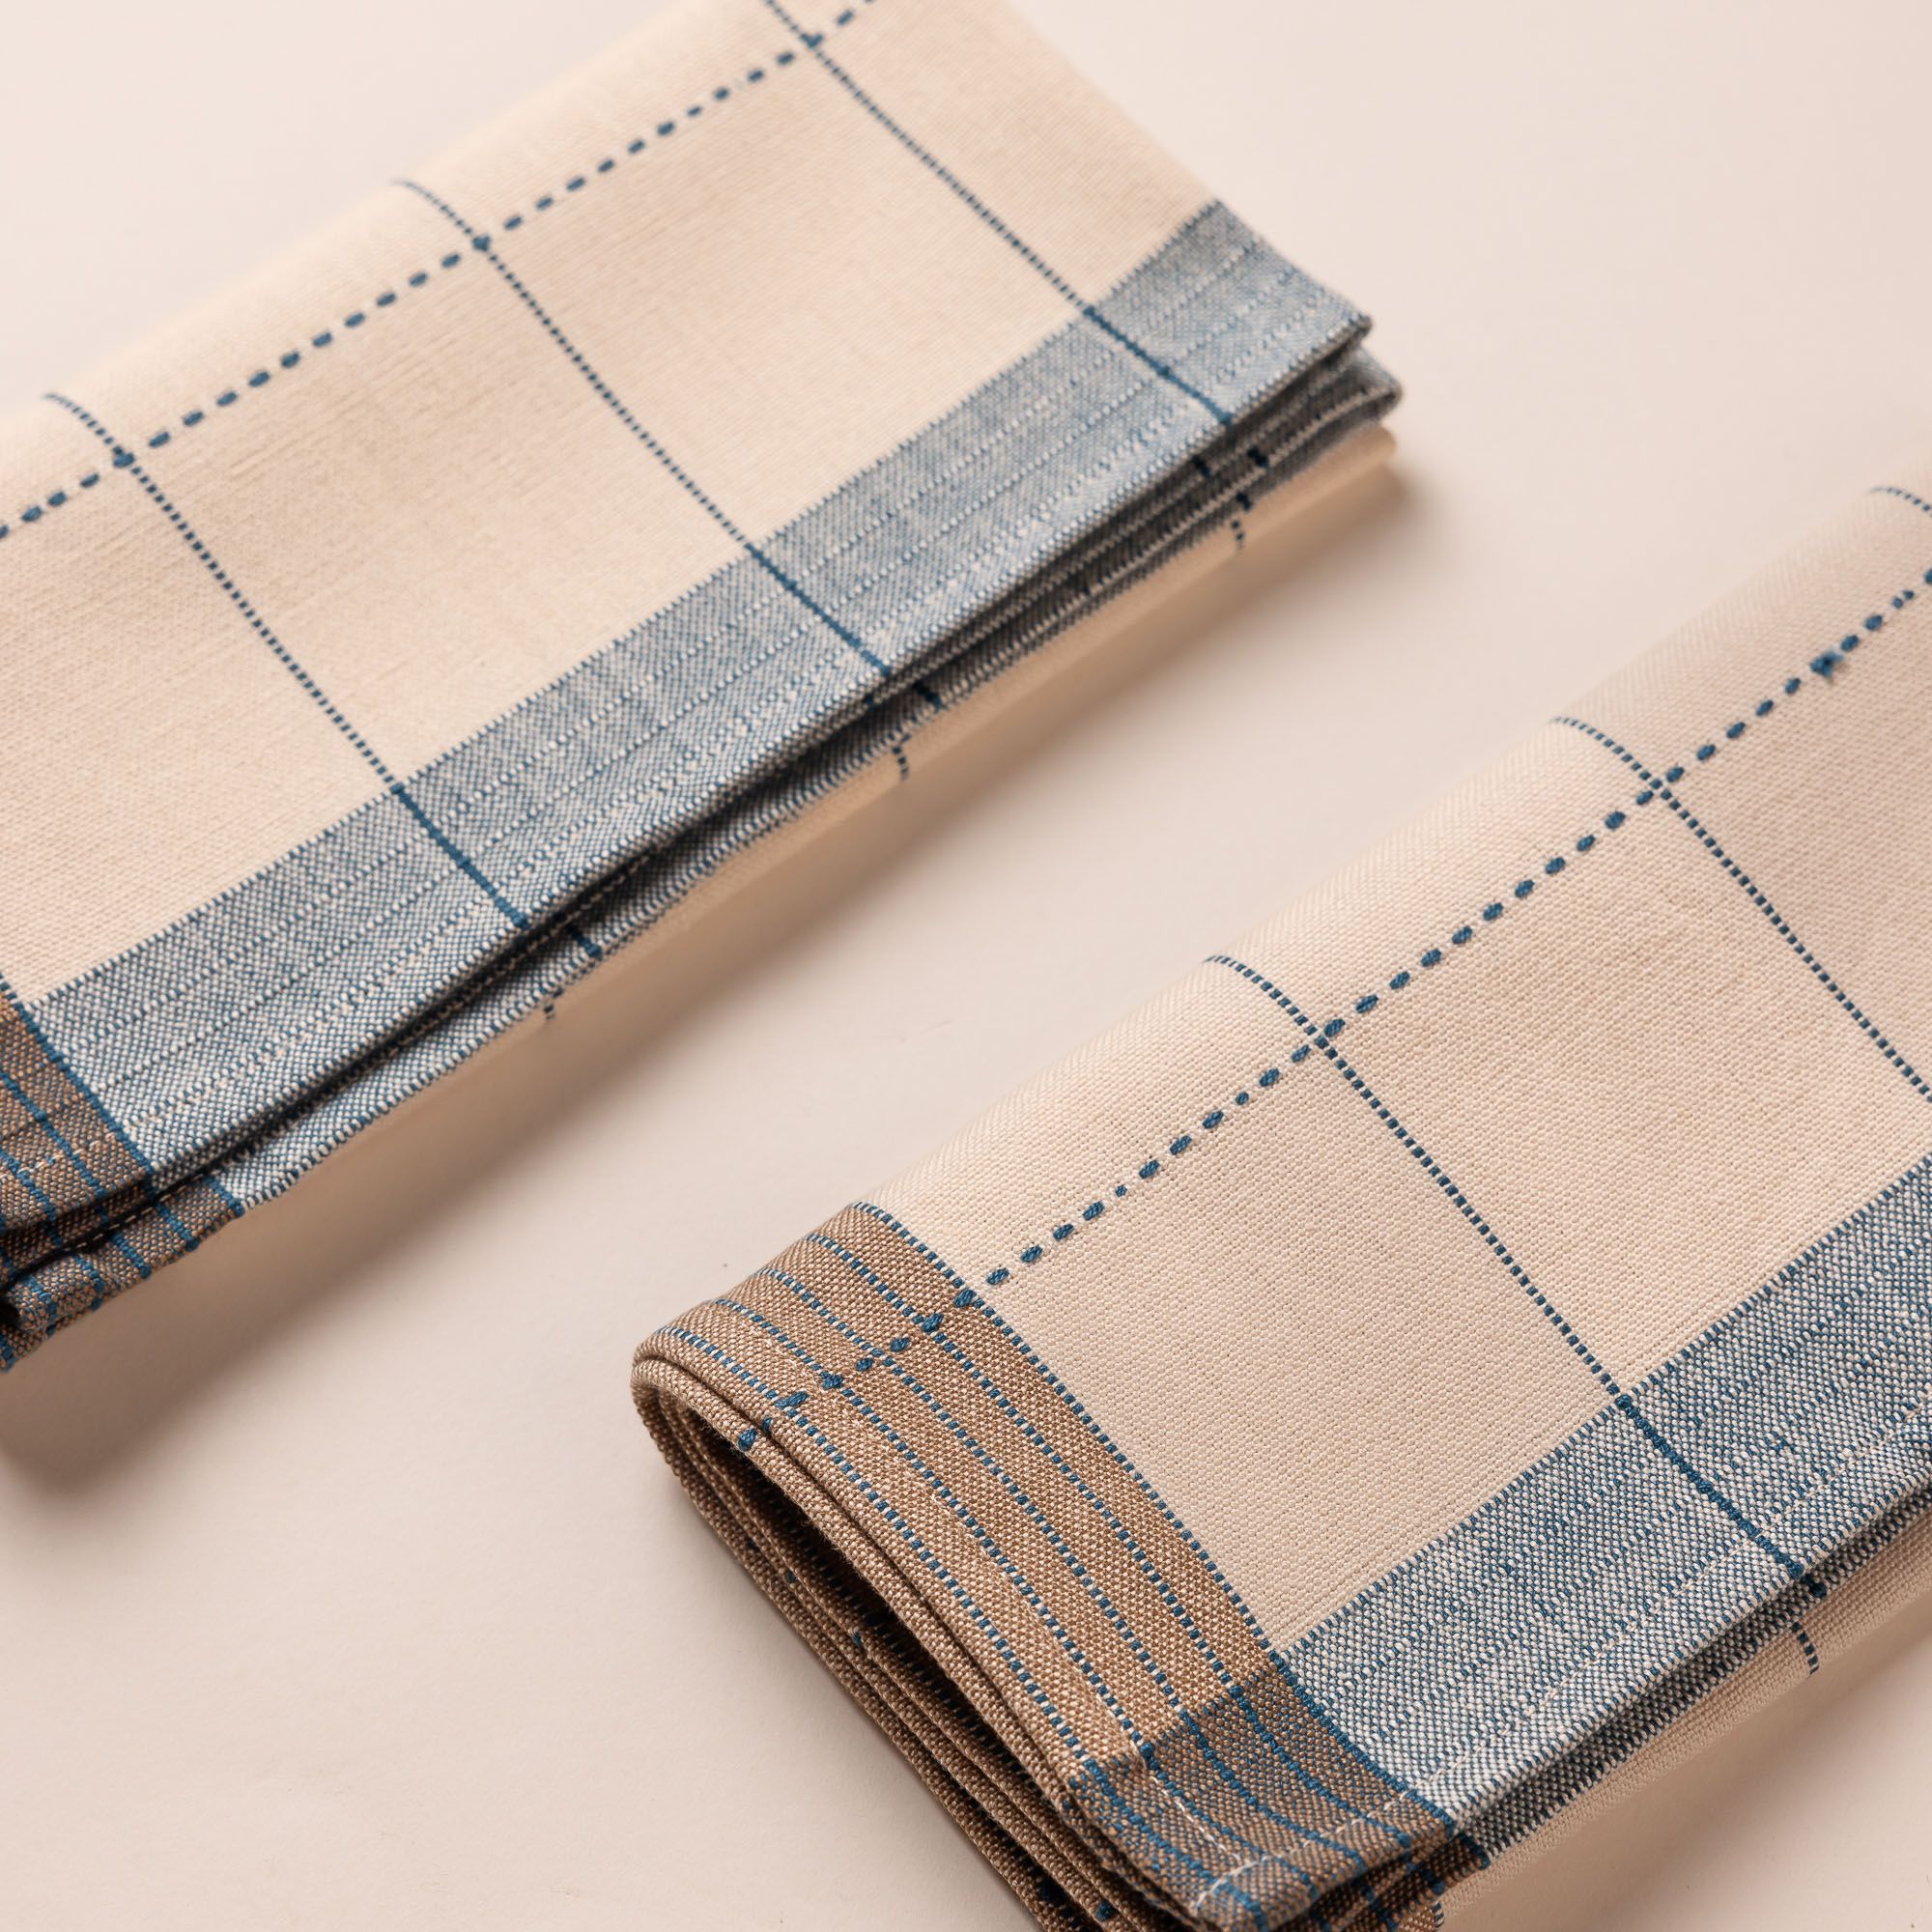  Two natural folded napkins side by side that are designed with turquoise gridlines with light blue and tan striped edging.